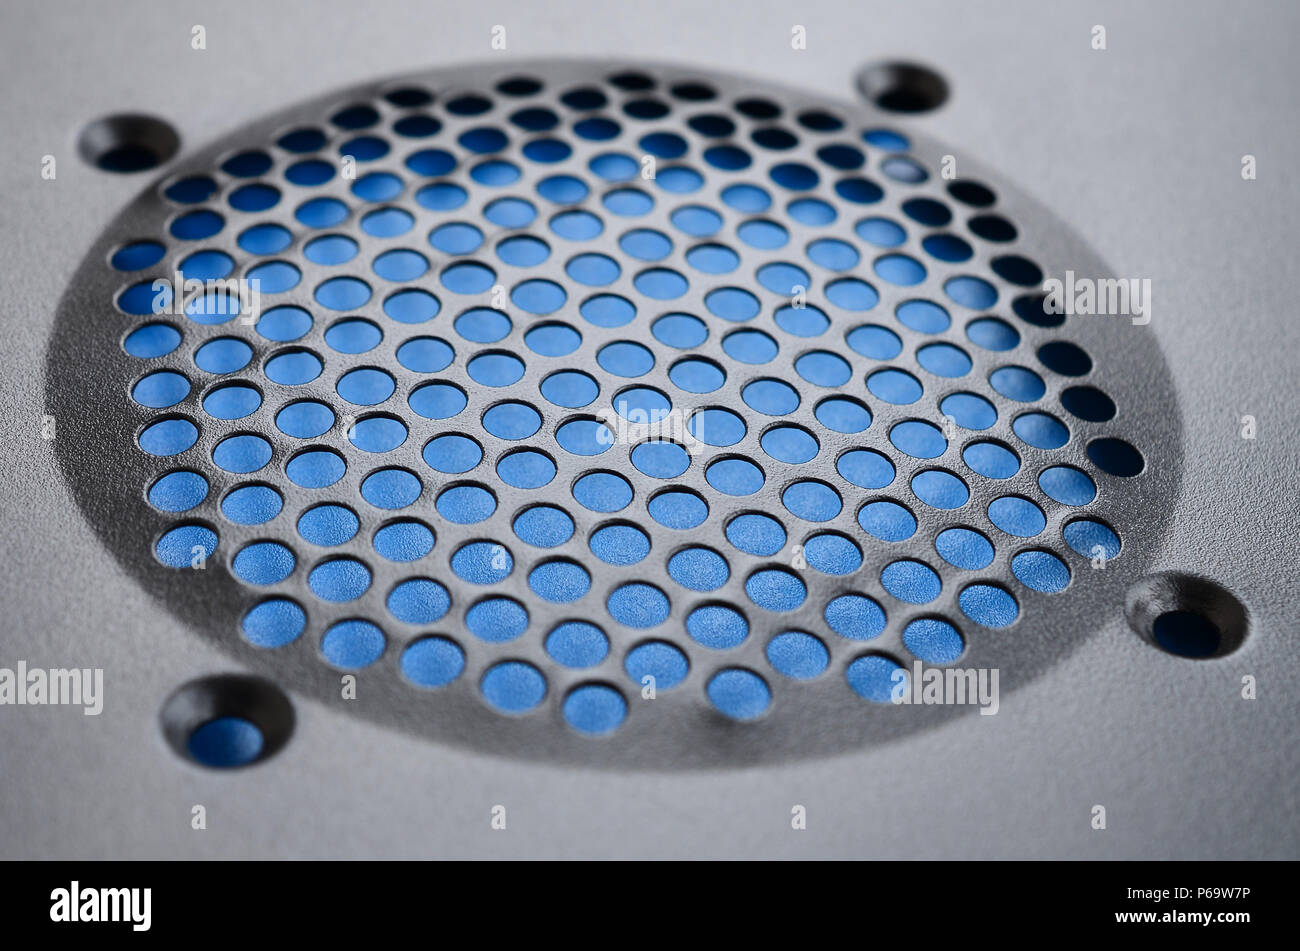 Close-up, shallow focus of a meshed style cooling panel used on a main frame computer. The circular holes aid active venting of hot air within the com Stock Photo